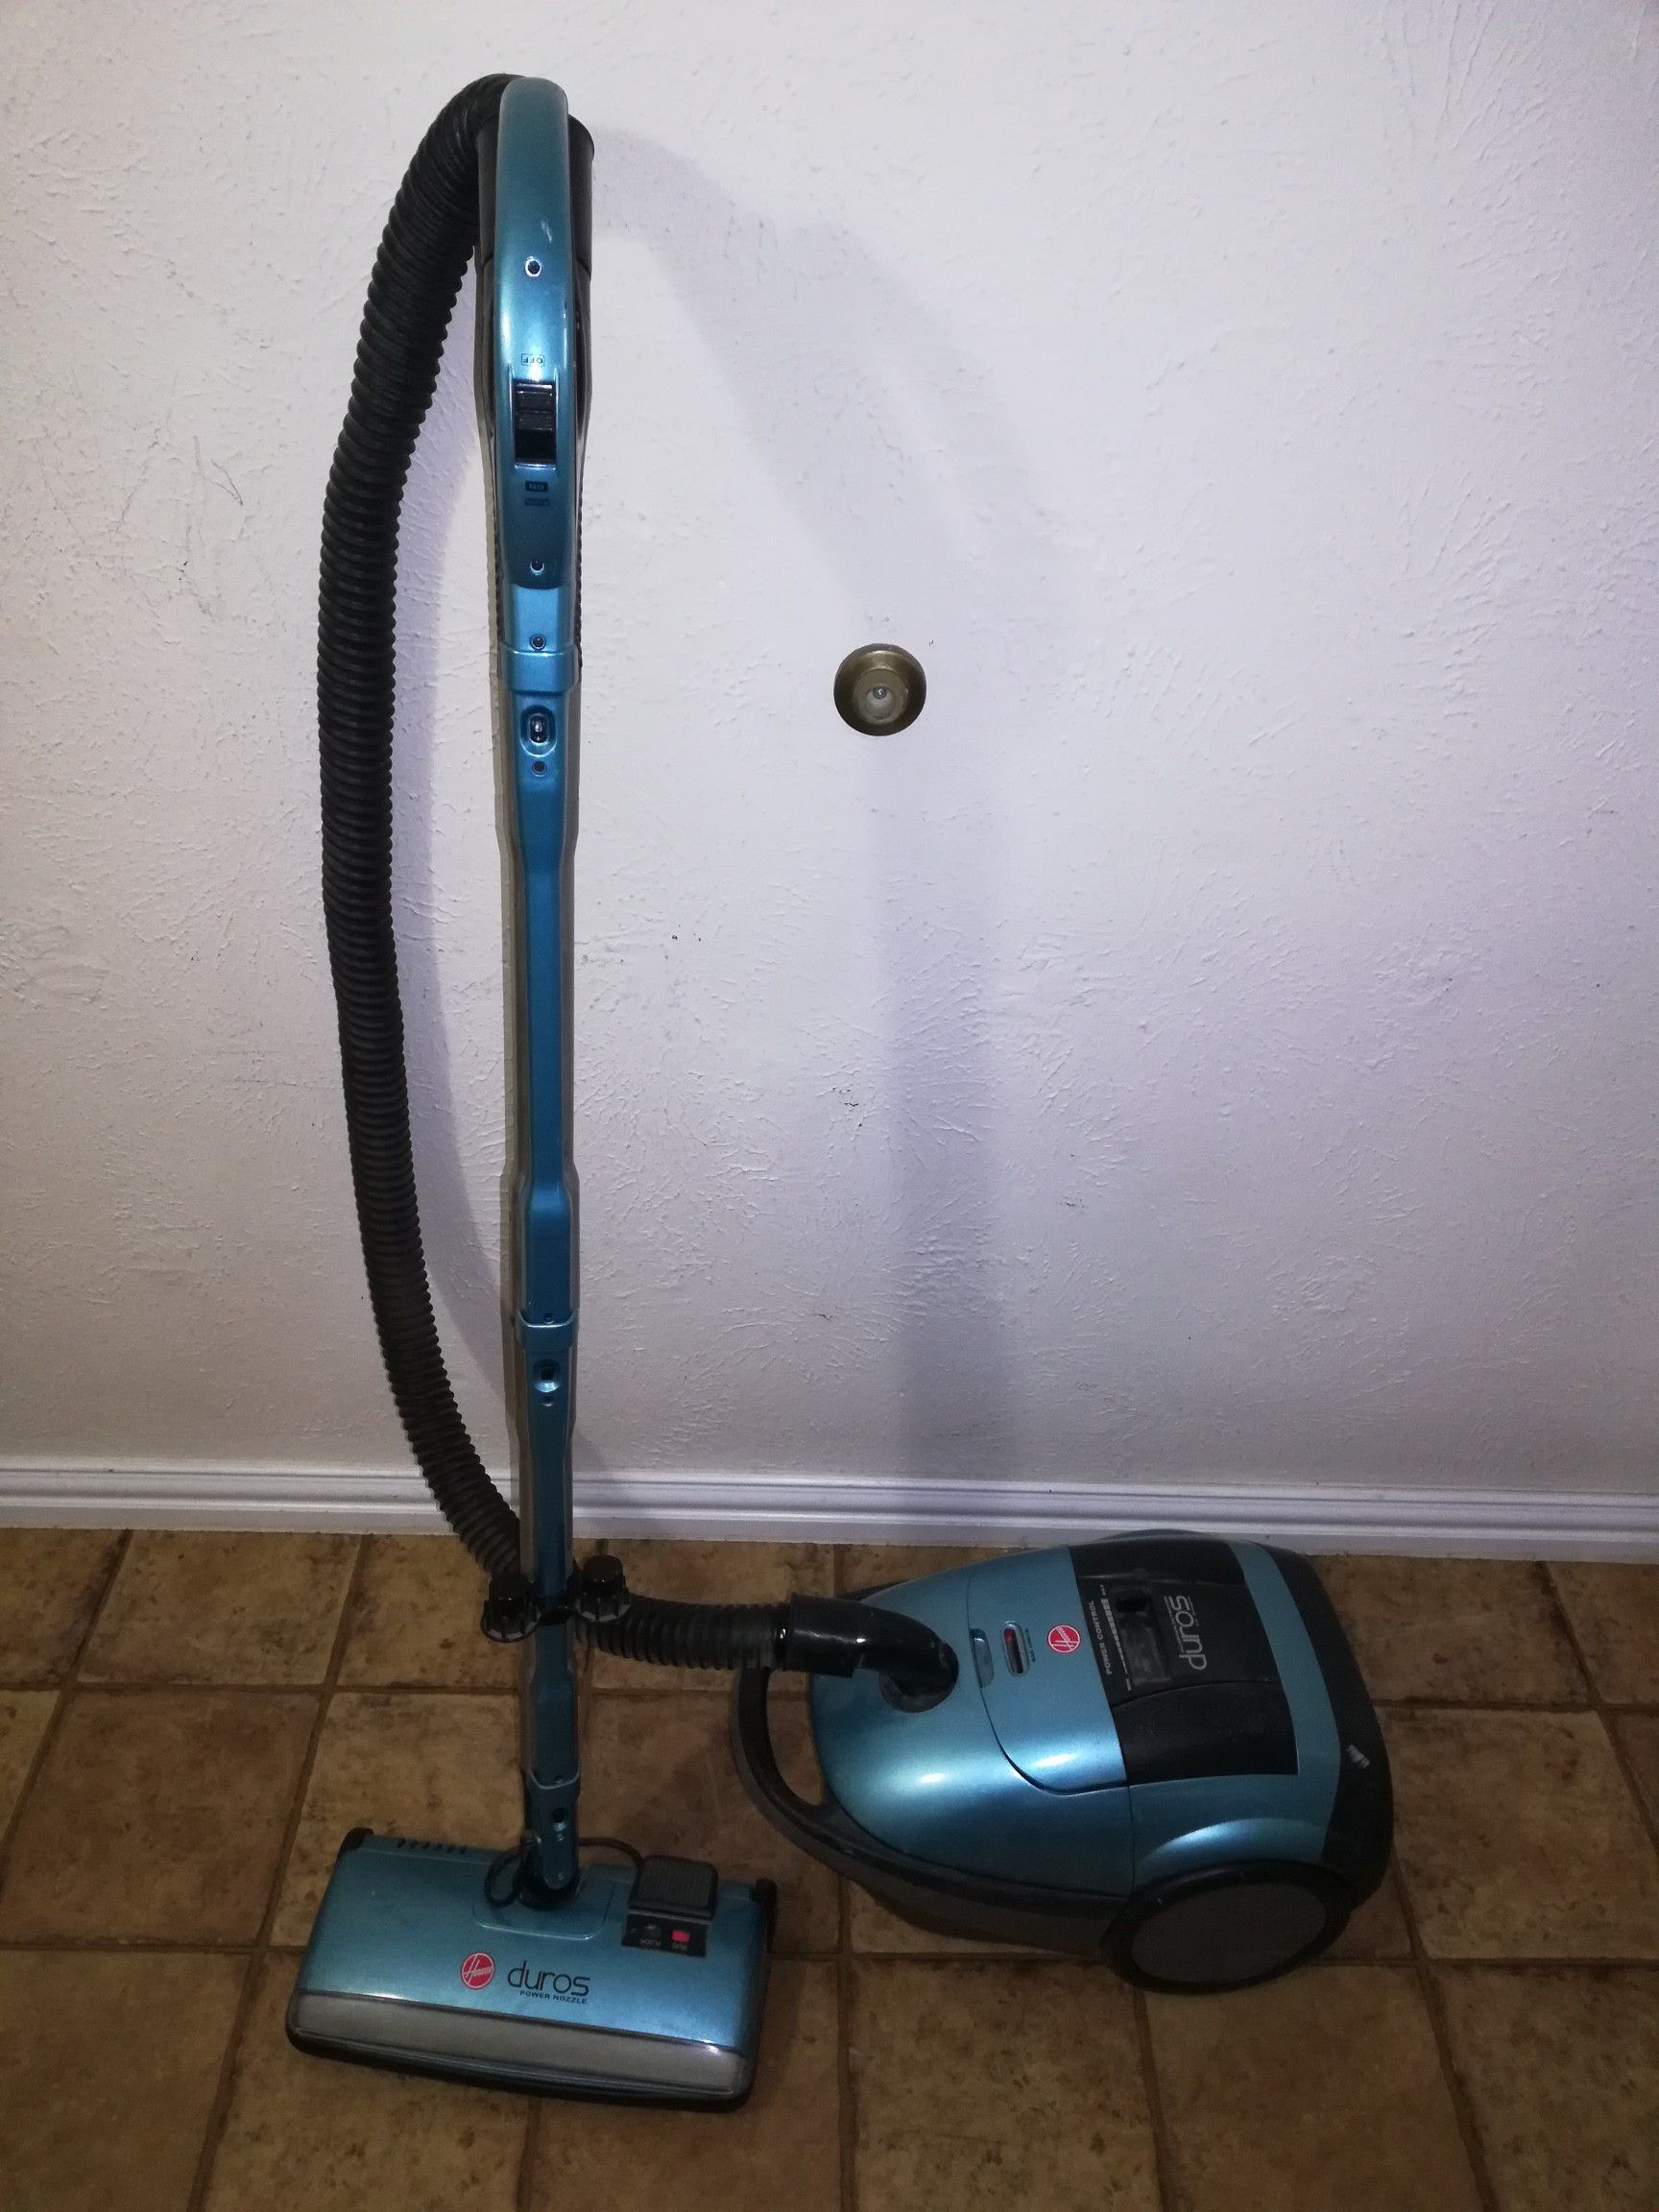 Hoover duros canister vacuum